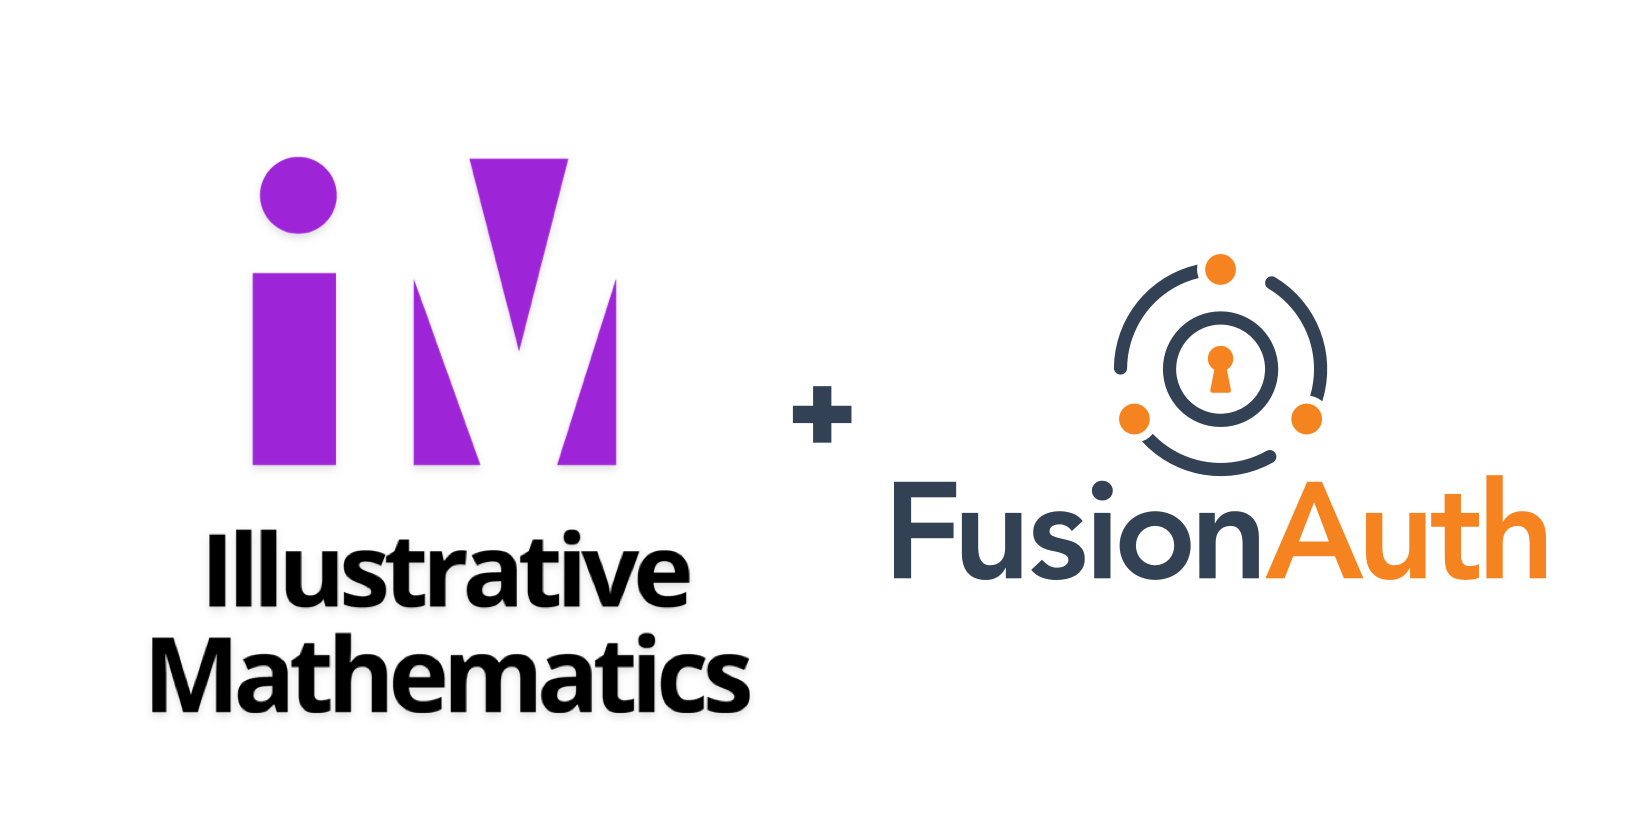 Illustrative Mathematics saved 50% by moving to FusionAuth from Auth0